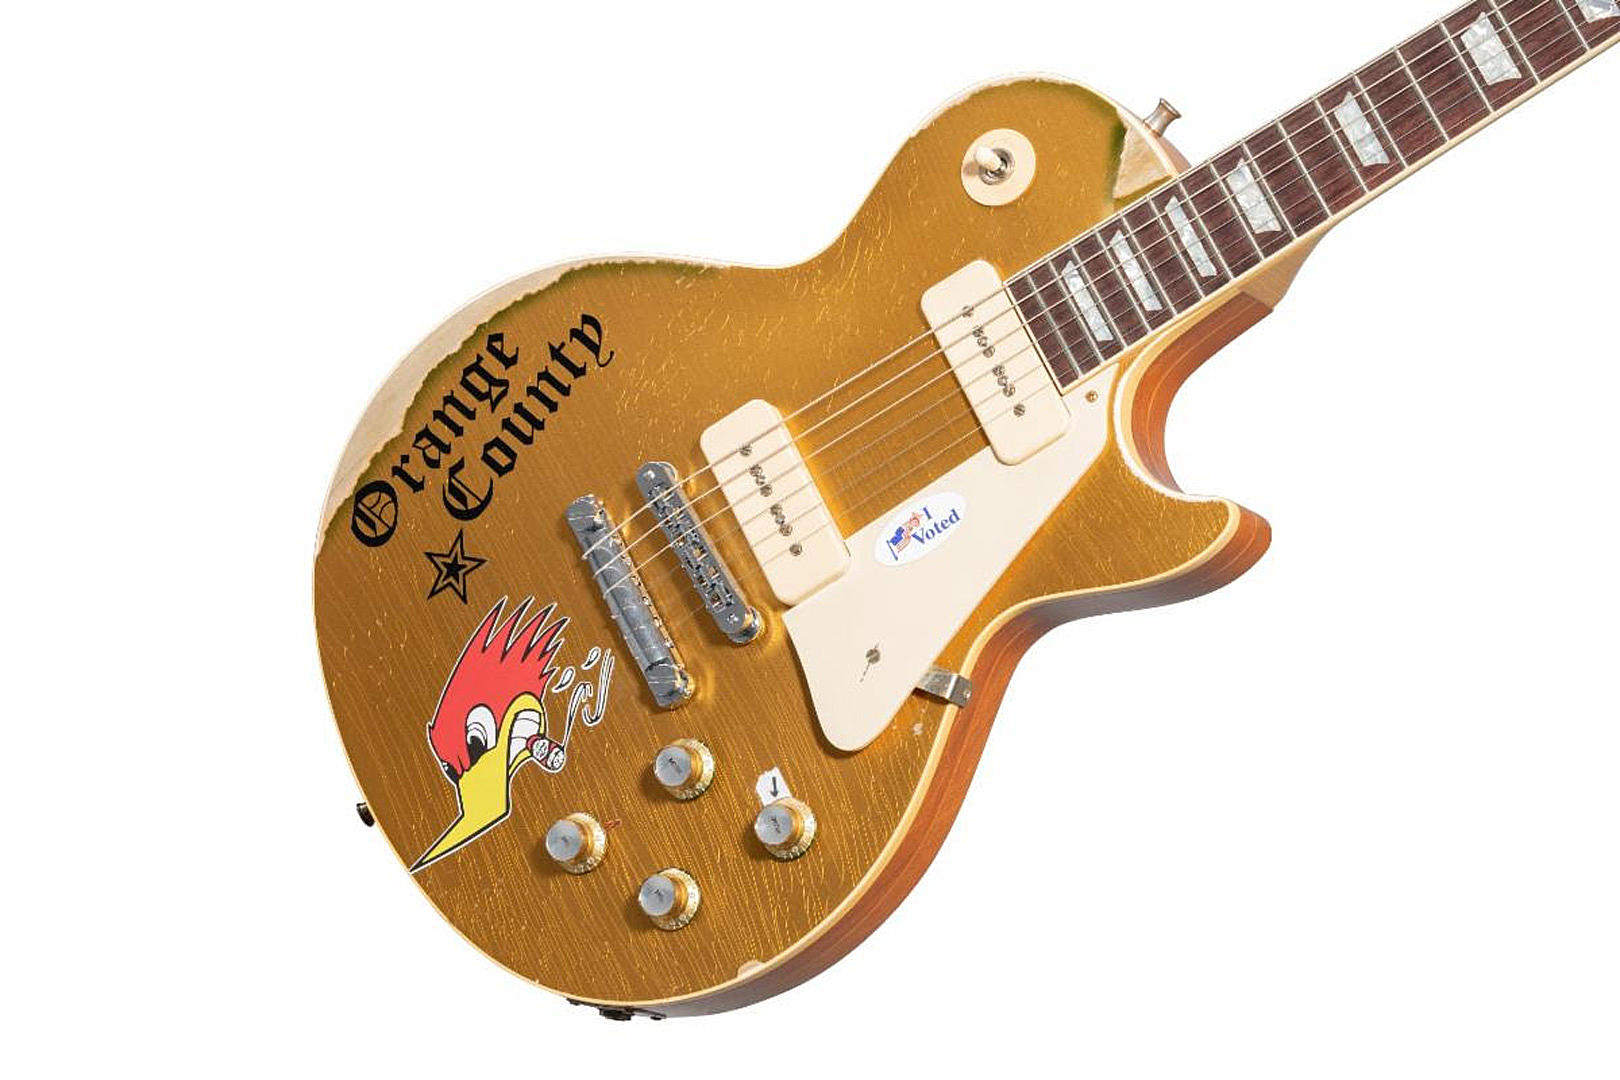 Mike Ness Teams With Gibson for 1976 Les Paul Deluxe Guitar